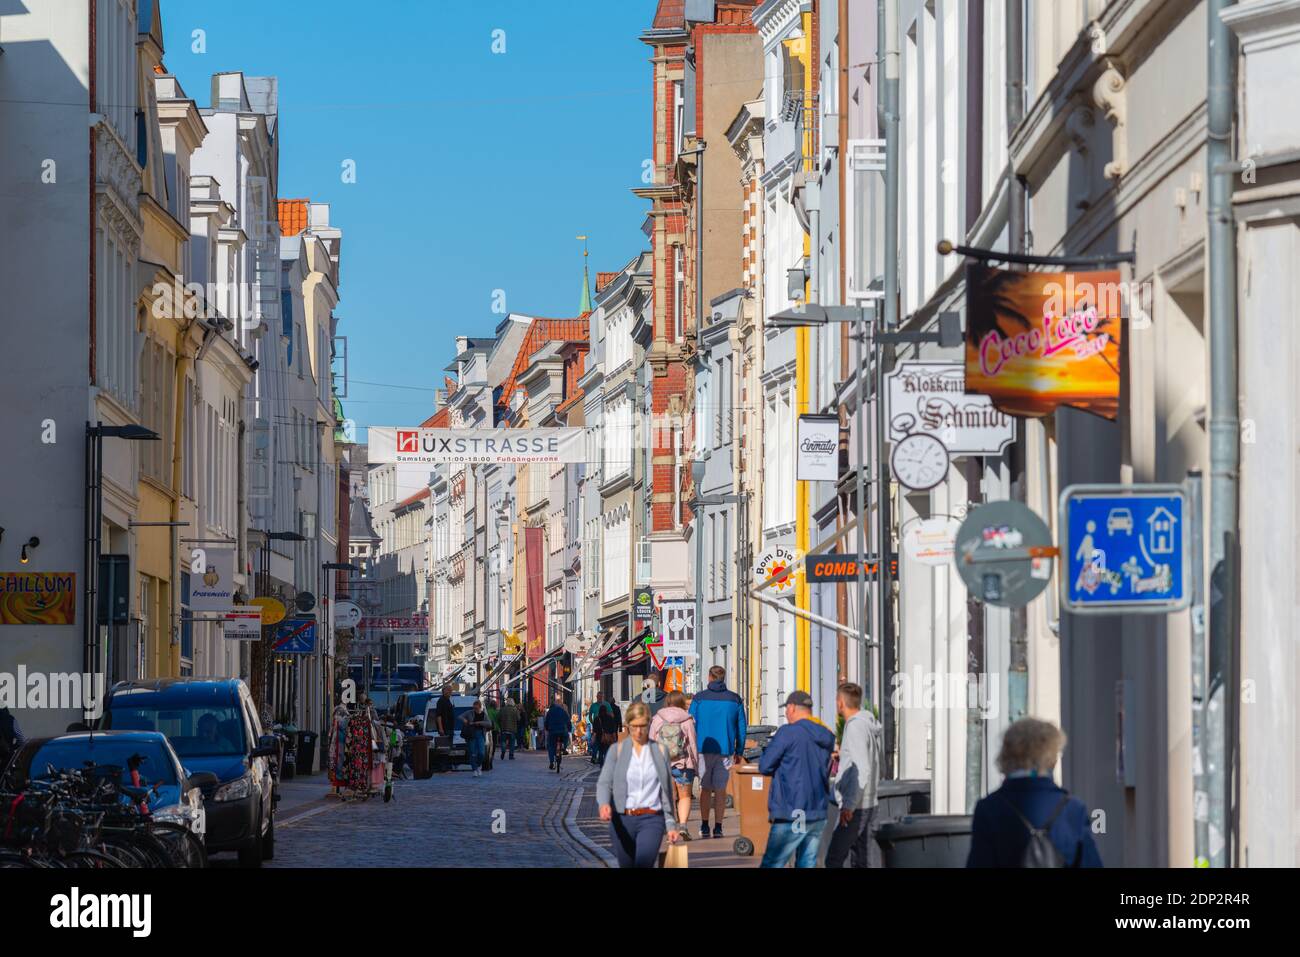 Hüxtrasse,one of the most importantand popular shopping streets with small shops, Hanseatic City of Lübeck, Schleswig-Holstein, North Germany, Europe Stock Photo